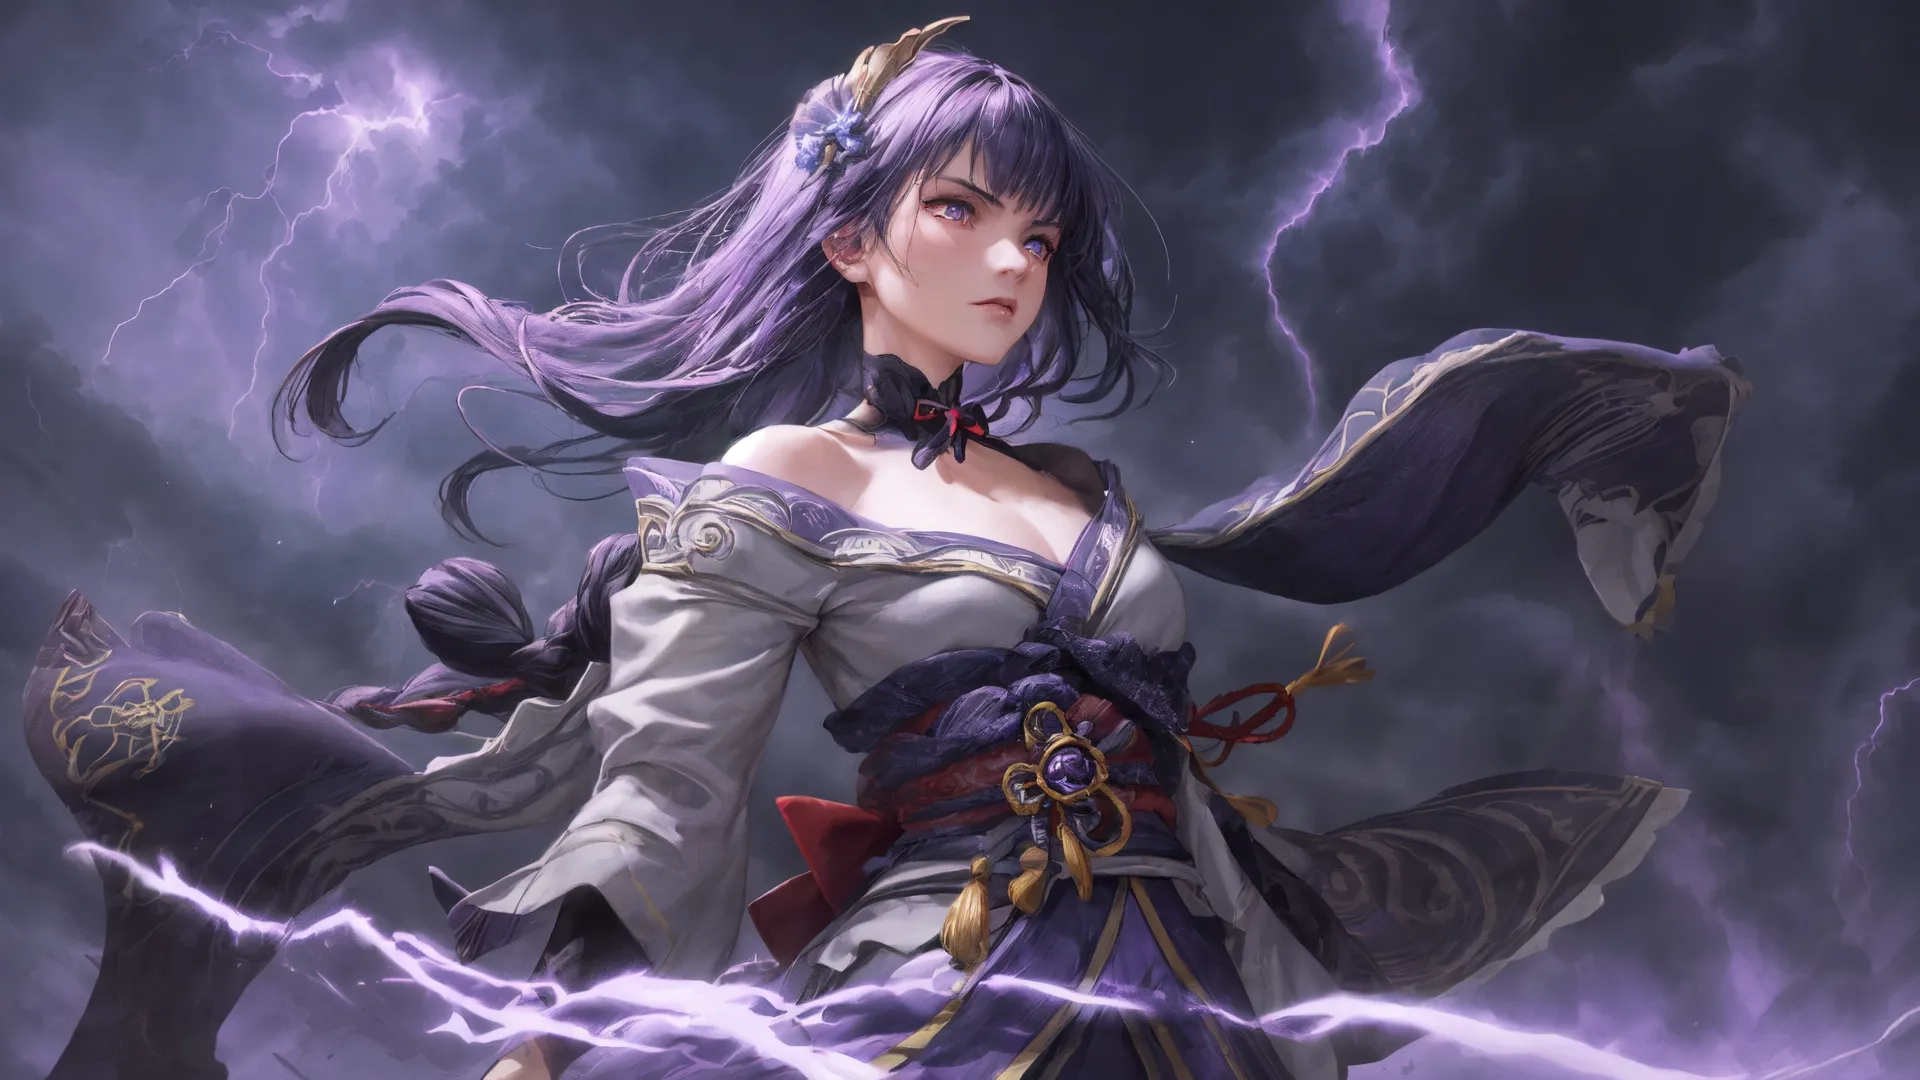 a anime characters sitting on a bench under a cloudy sky full of lightning and bolts, while holding a sword in her hand, surrounded by other characters
